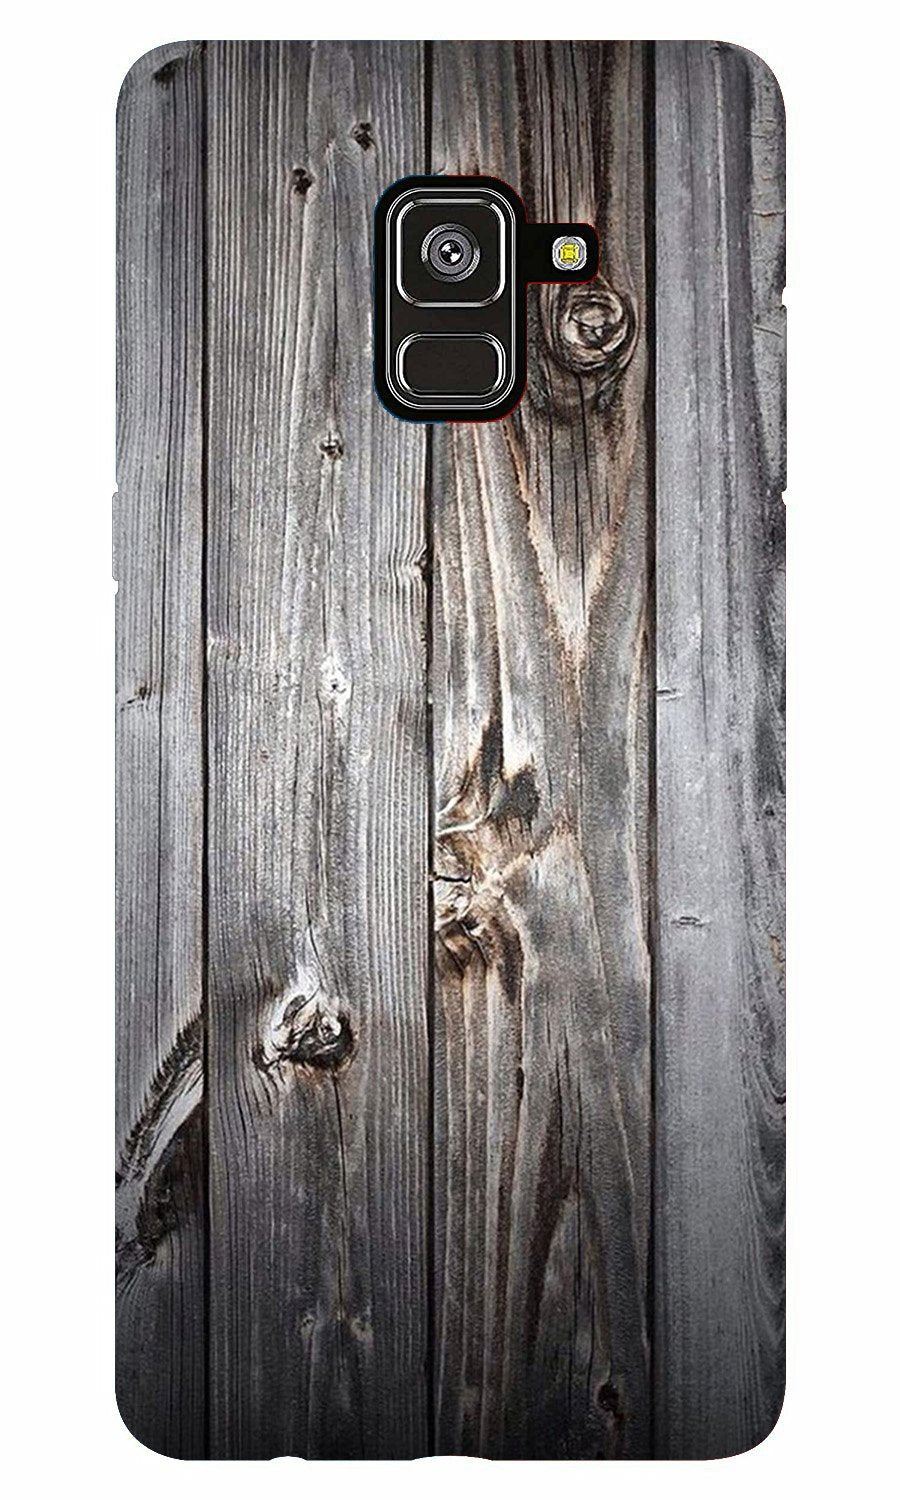 Wooden Look Case for Galaxy J6/On6(Design - 114)